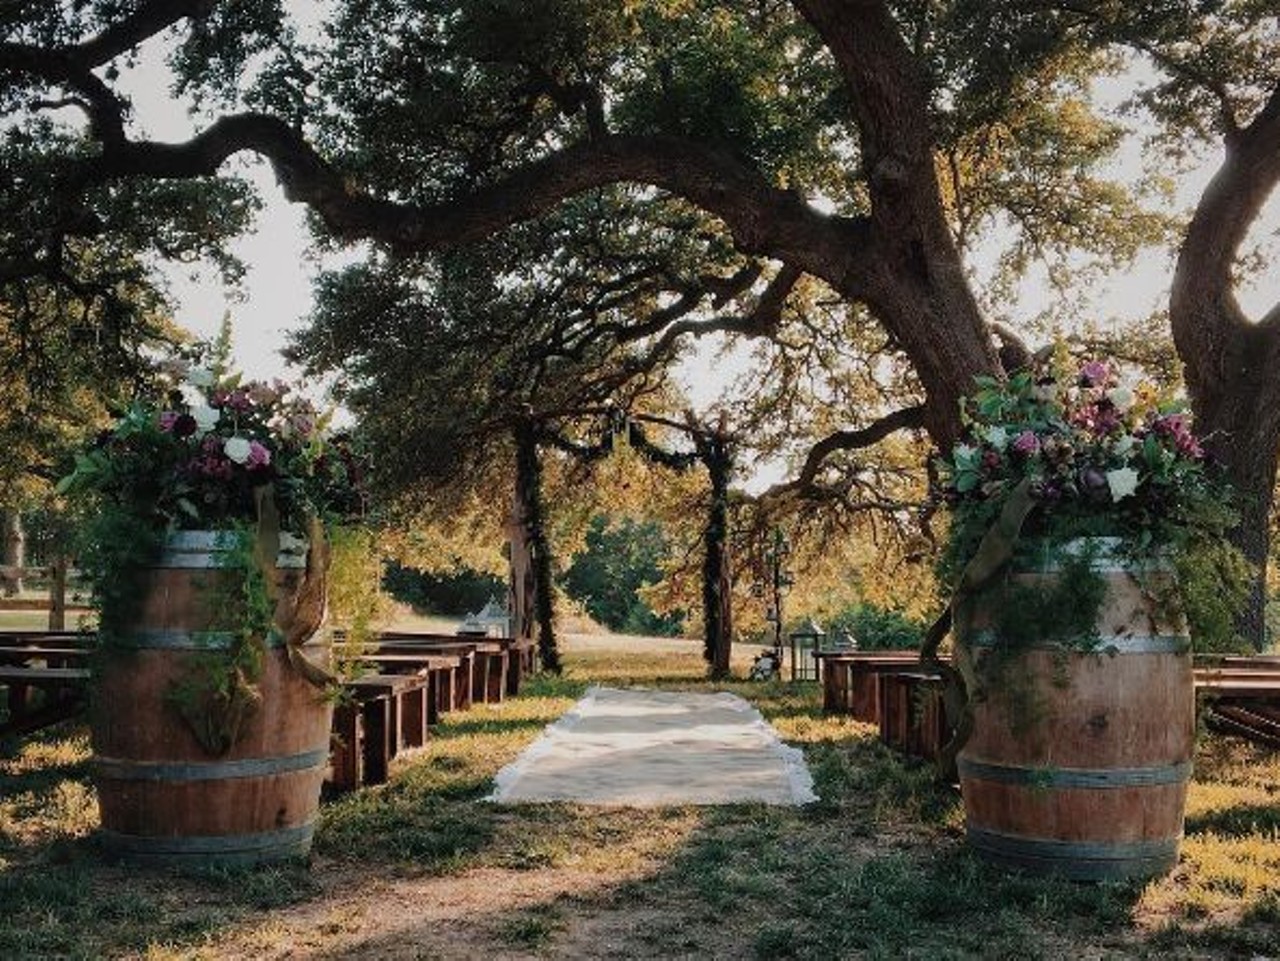 Dimebox Ballroom
The outdoor ceremony space, nicknamed the Green Cathedral, is shaded by thick oak trees, marking an intimate enclosure. The grounds is also home to a fire pit, Groom&#146;s Icehouse, and a Bridal Cabin.
715 Young Ranch Road, Georgetown, dimeboxballroom.com
Photo via Instagram, dimeboxballroom